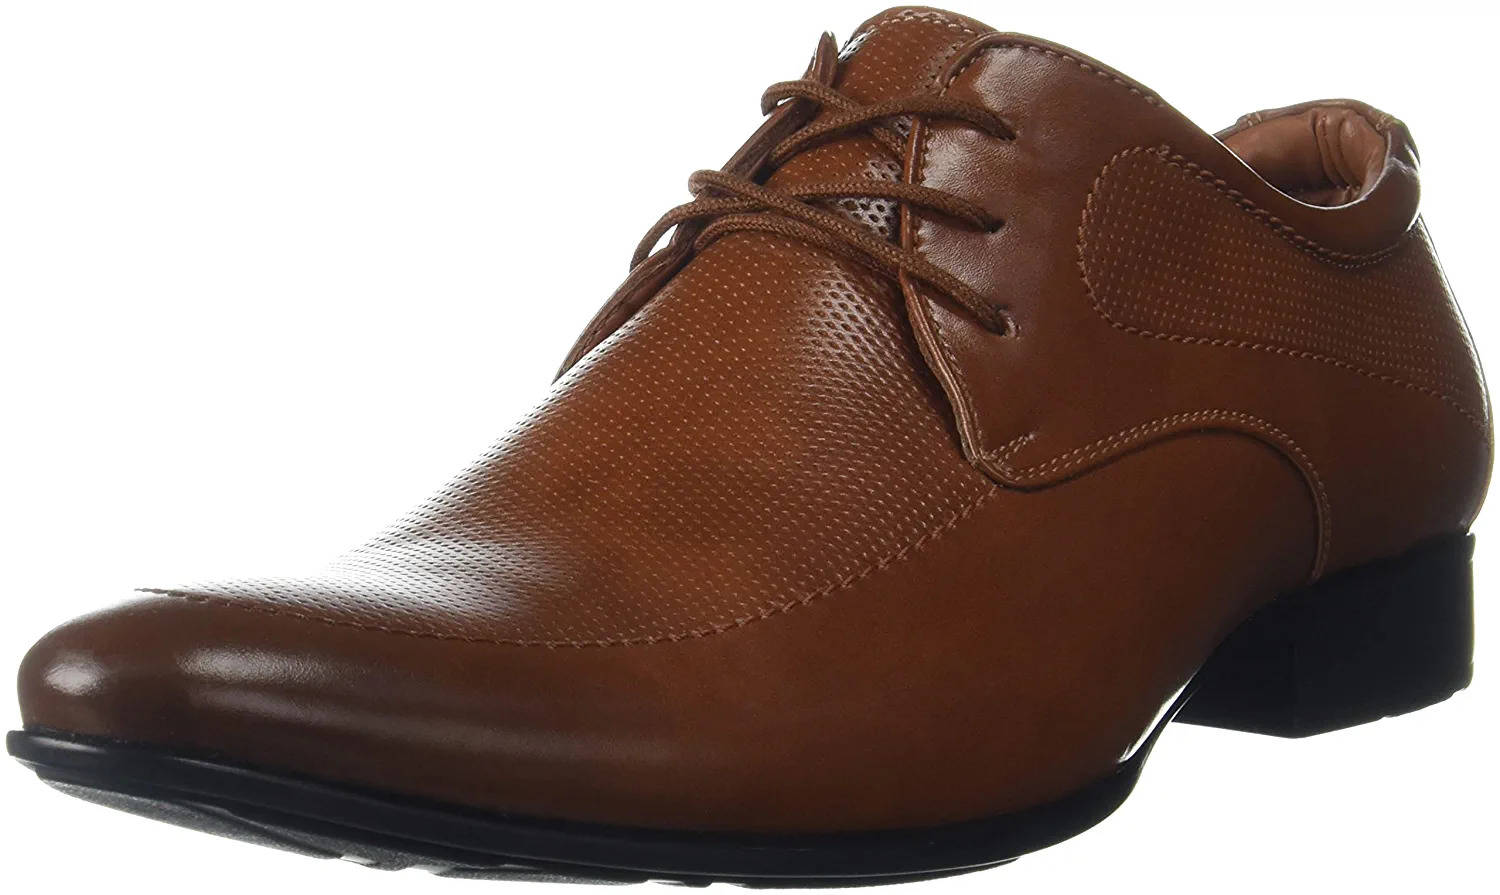 Best Derby Shoes: Introducing The 5 Best Derby Shoes That Every Man ...